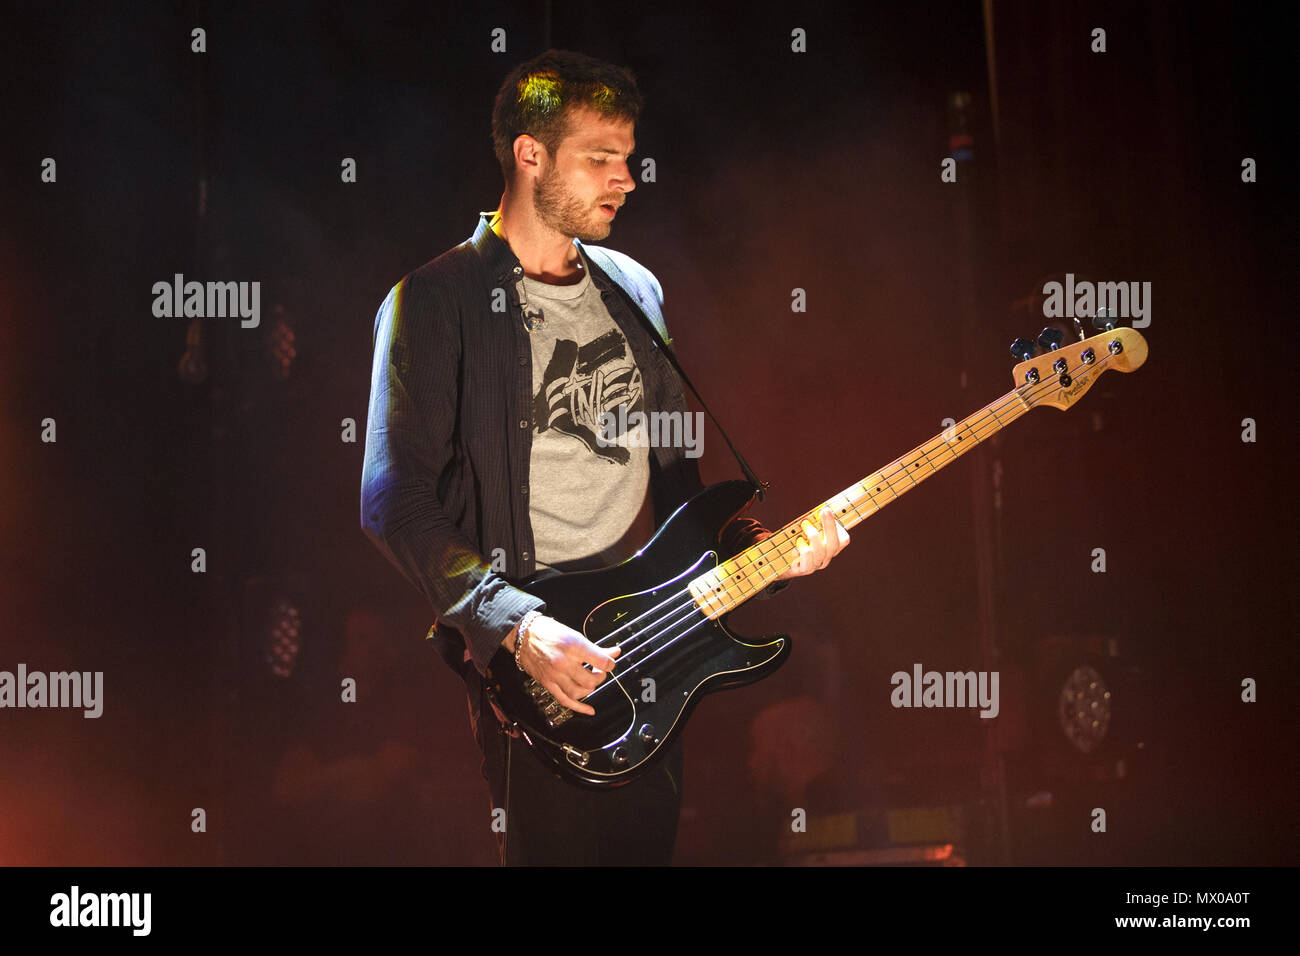 Rupert Shepherd, bass guitarist of The Maccabees, live onstage on the opening night of the band's farewell tour in 2017. Rupert Shepherd bass guitarist, The Maccabees live, The Maccabees in concert, Fender bass guitar. Stock Photo